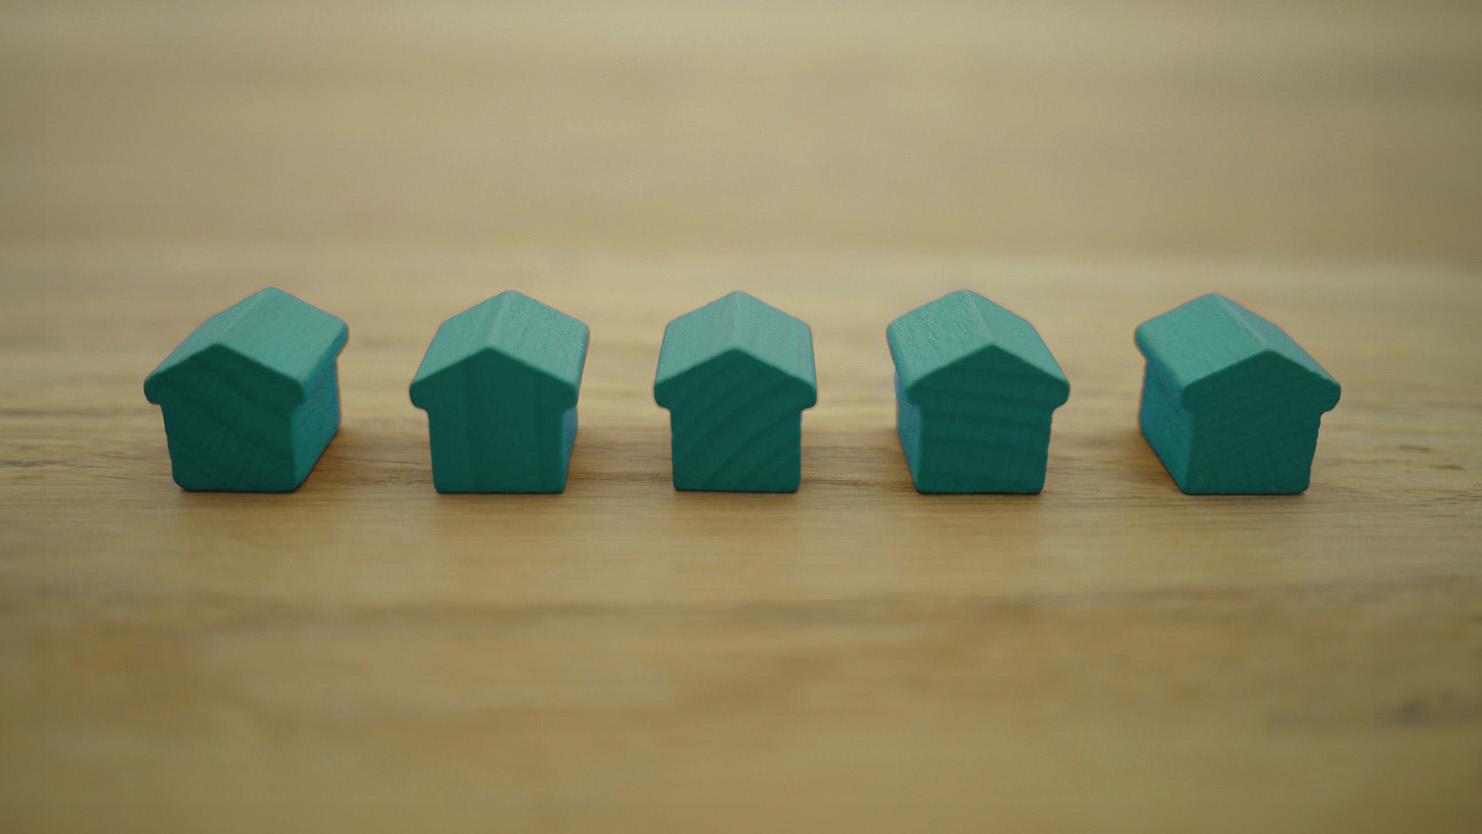 Green model houses on a wooden surface